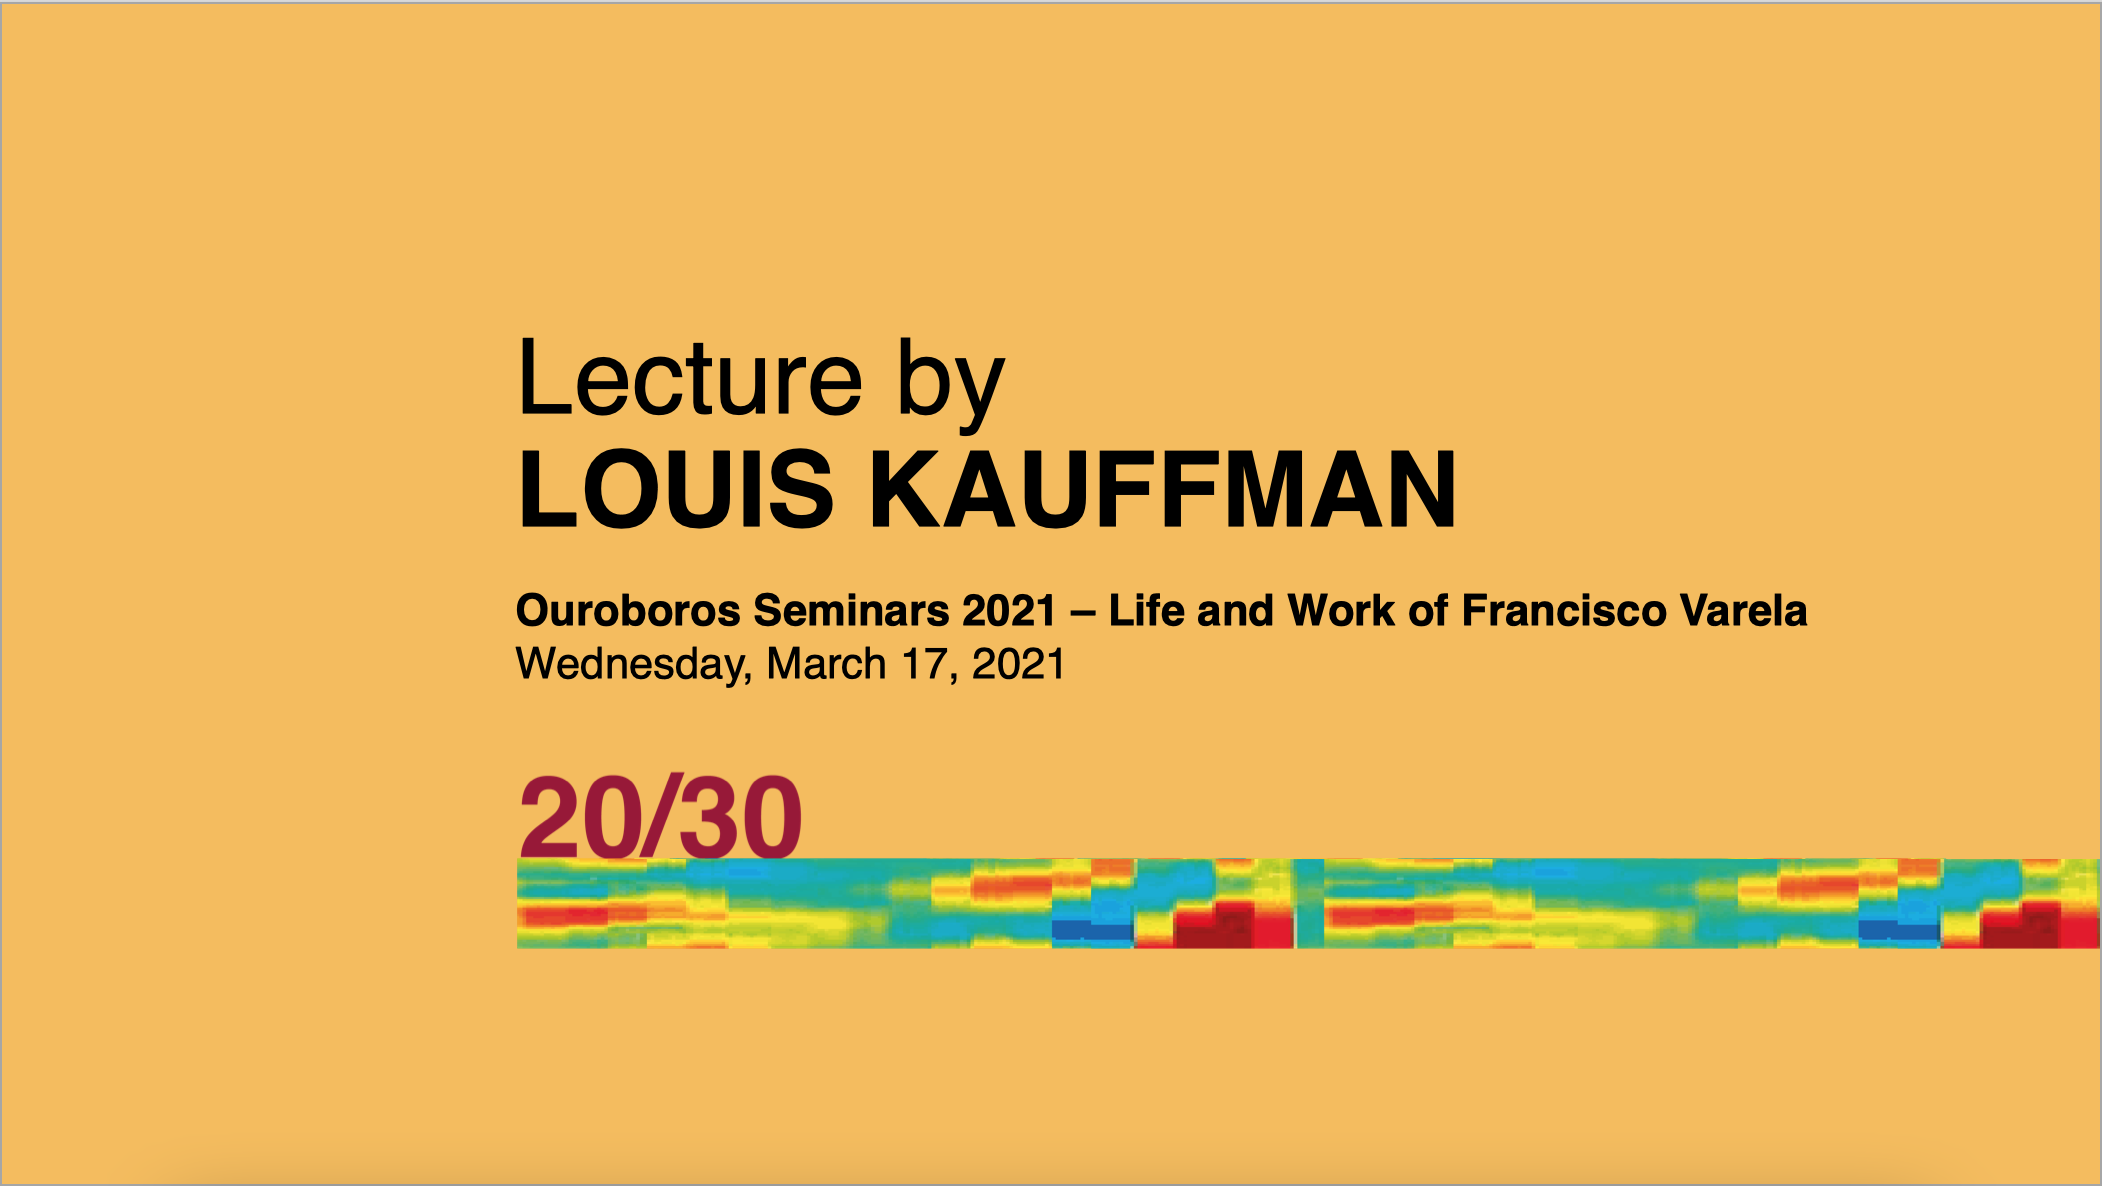 Lecture by Louis Kauffman